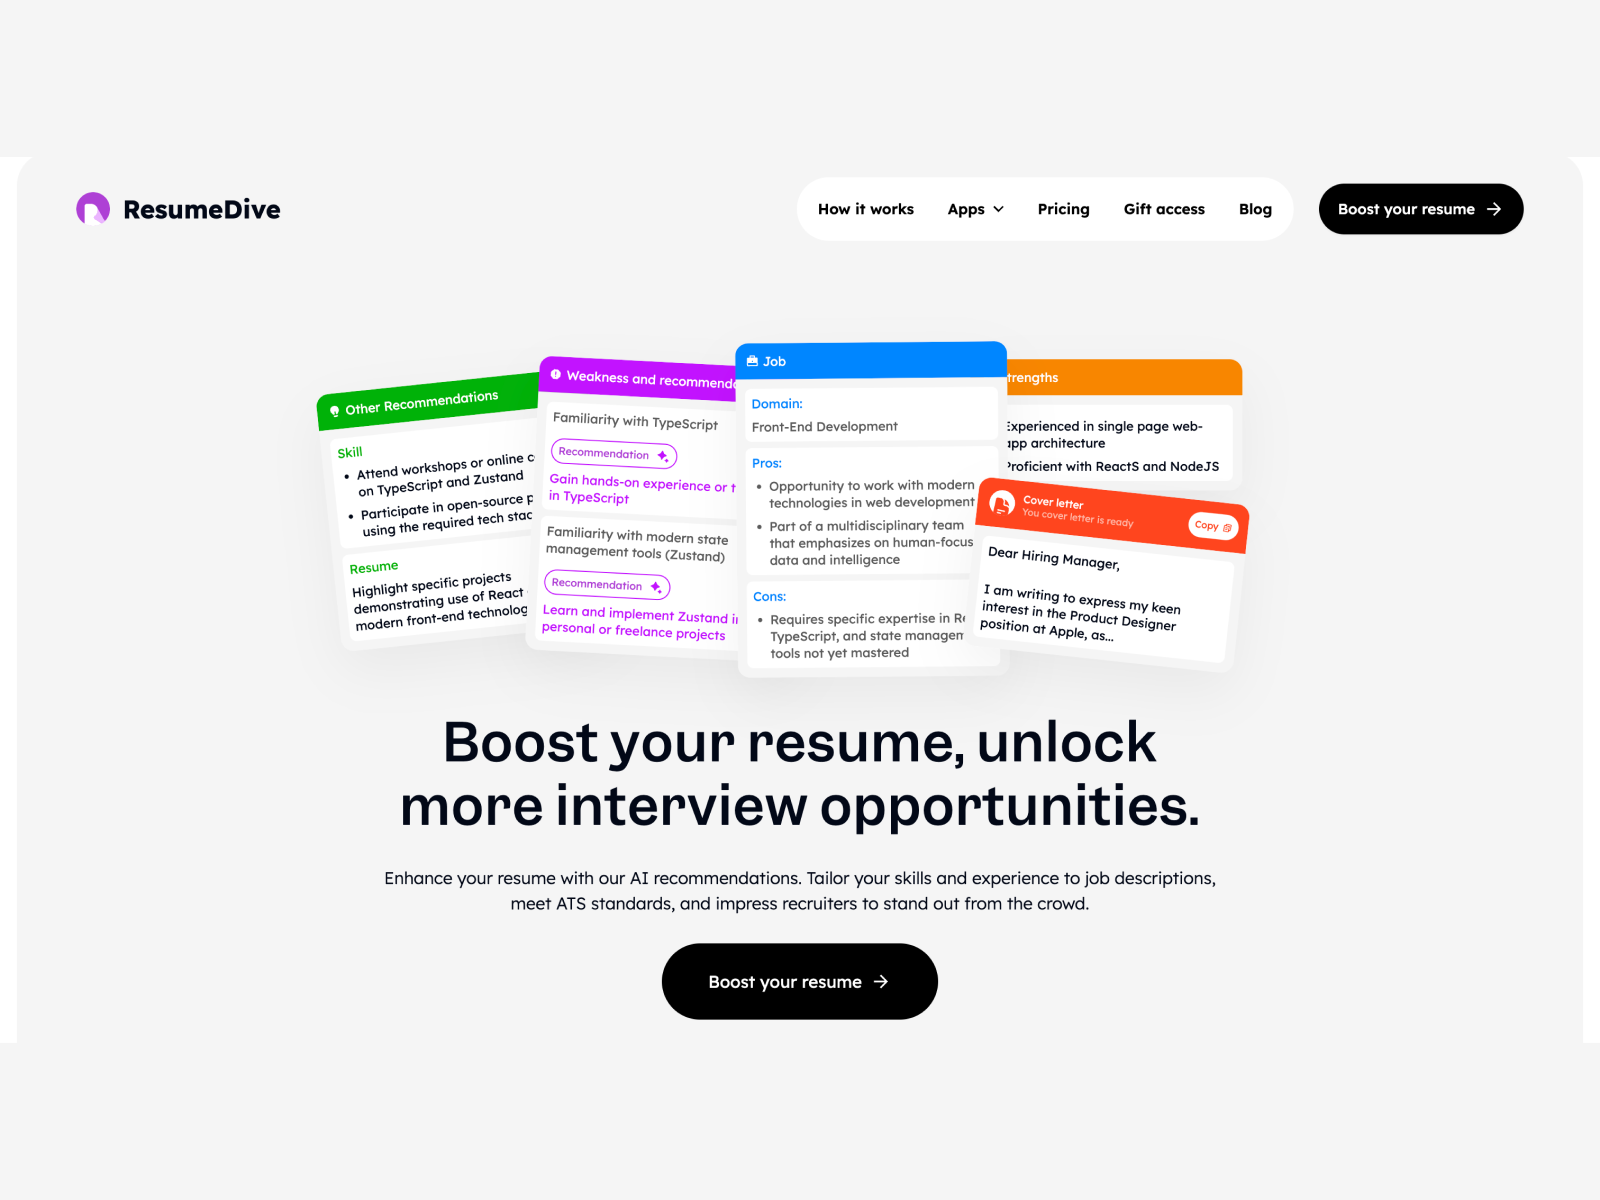 Review ResumeDive: A resume boosting service using AI - Appvizer